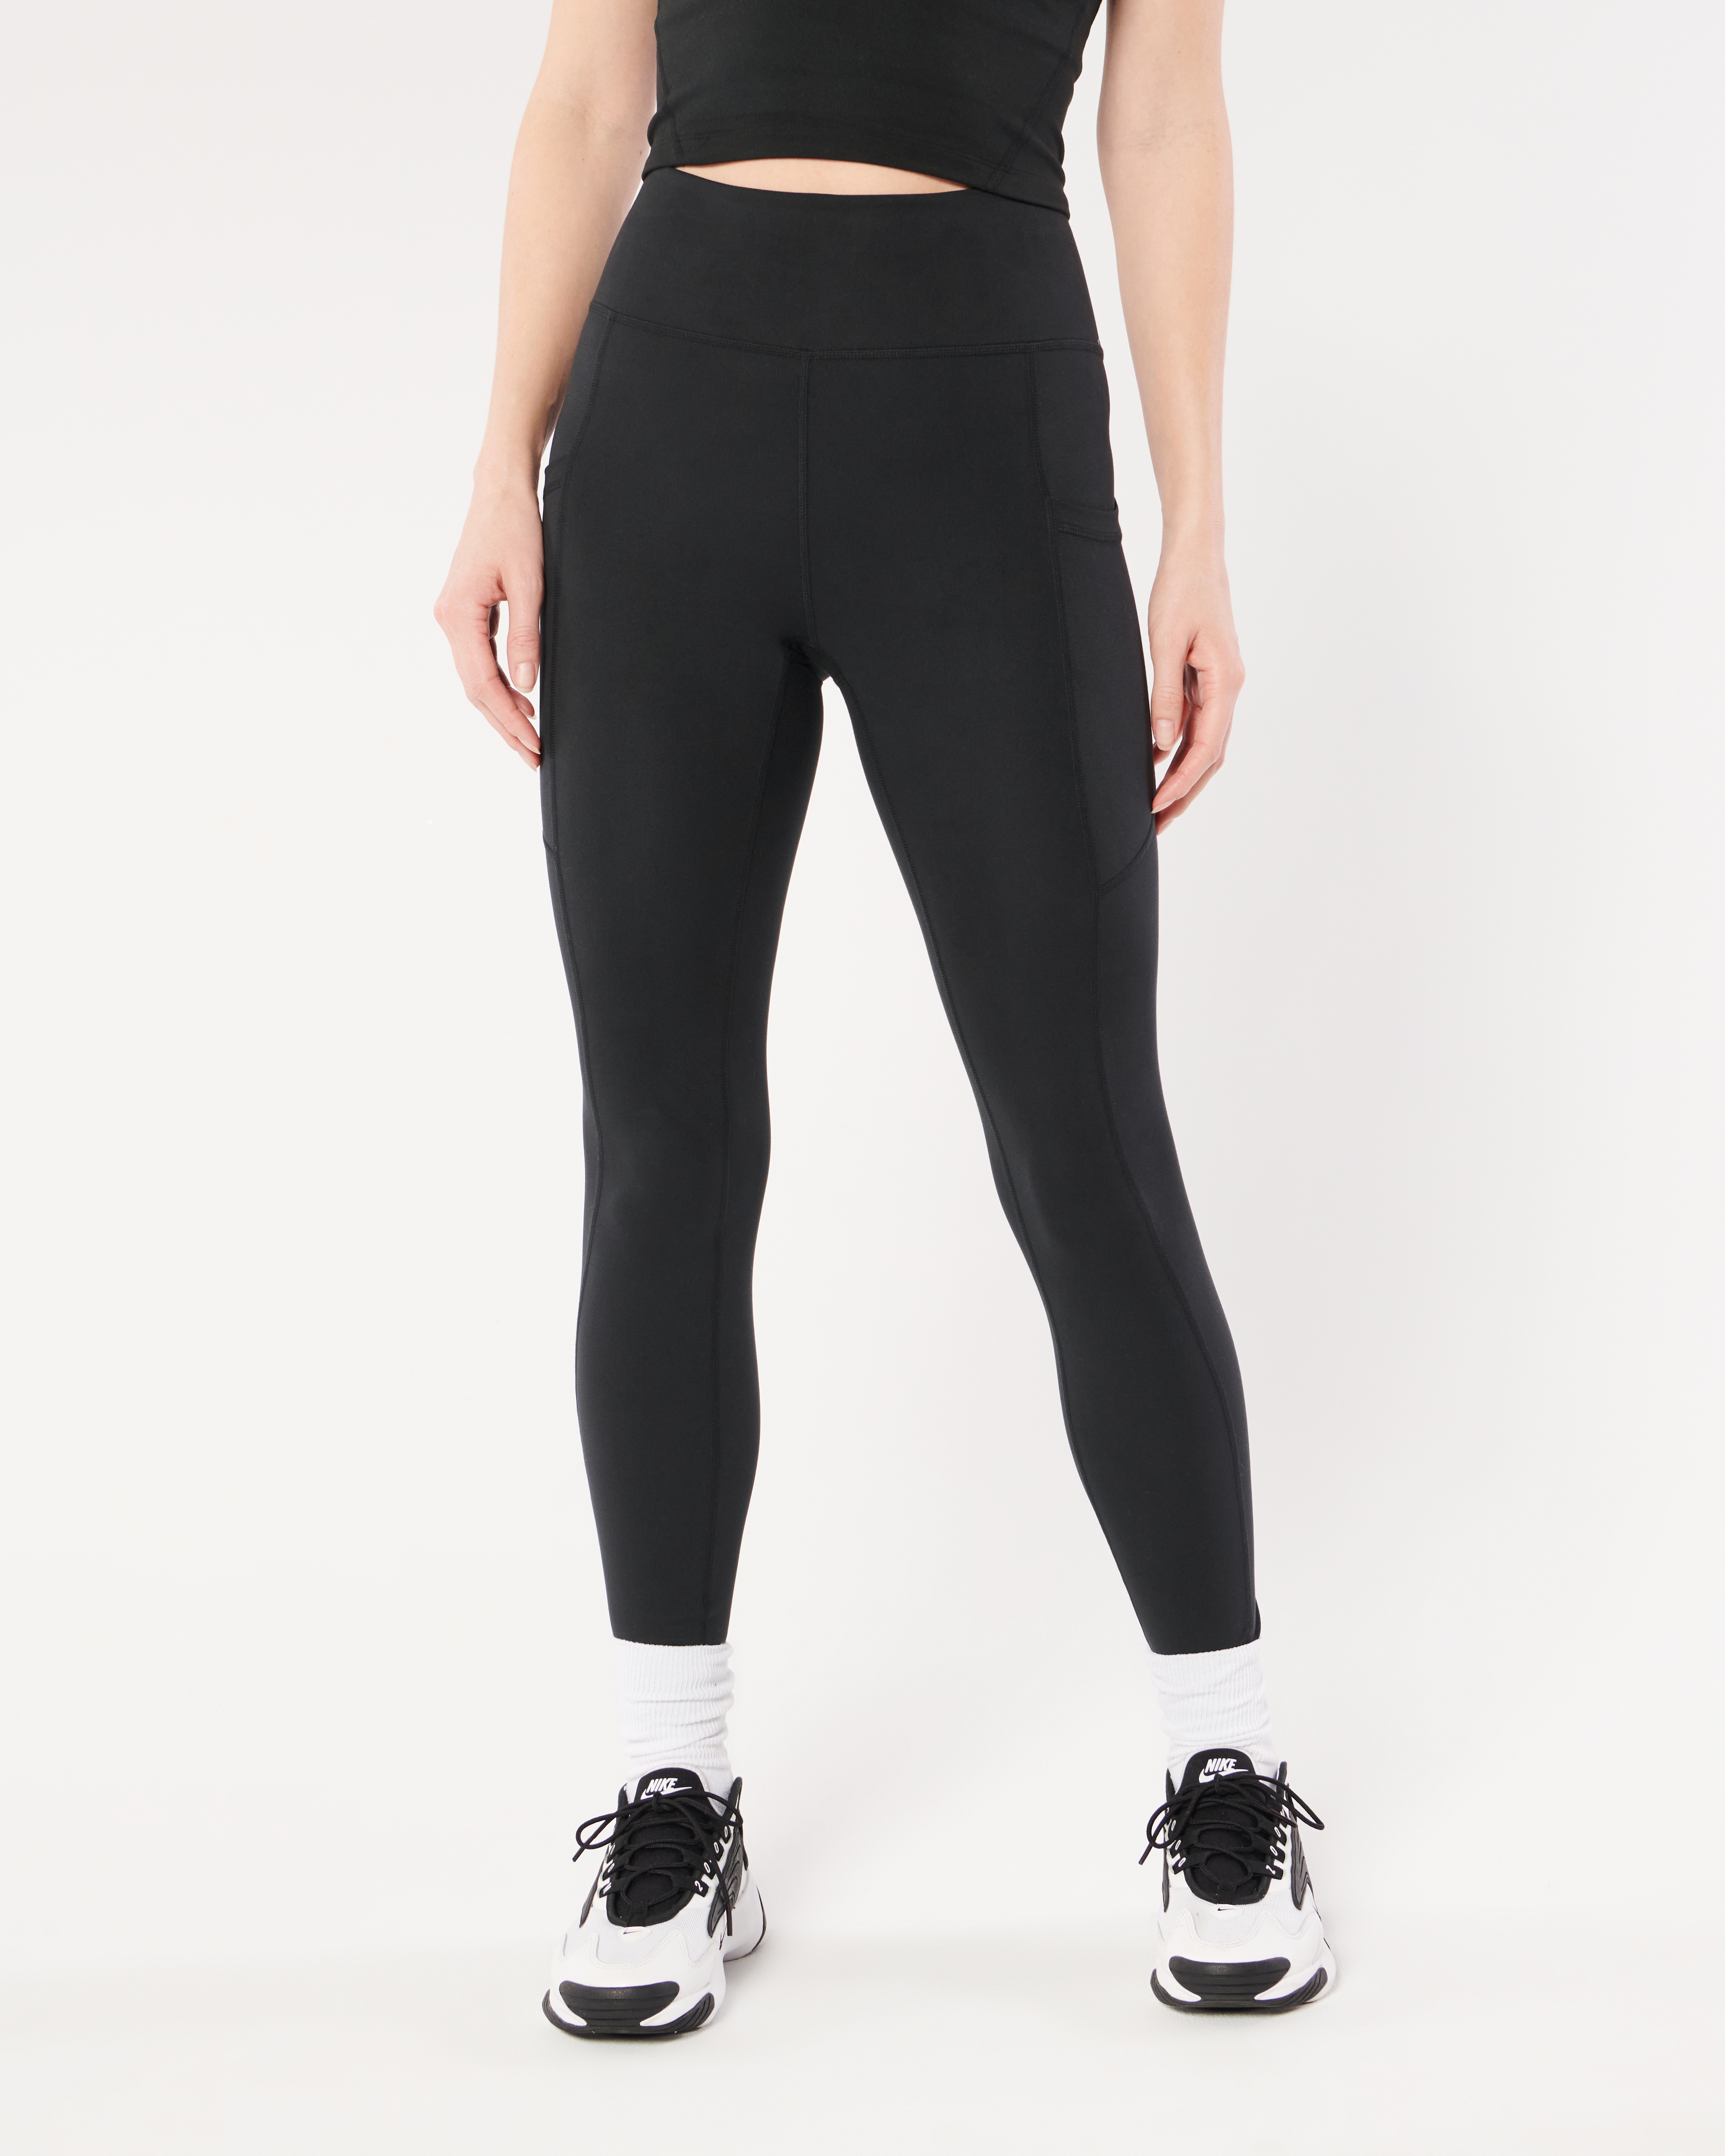 Women's Gilly Hicks Active Recharge High-Rise Flare Leggings, Women's New  Arrivals